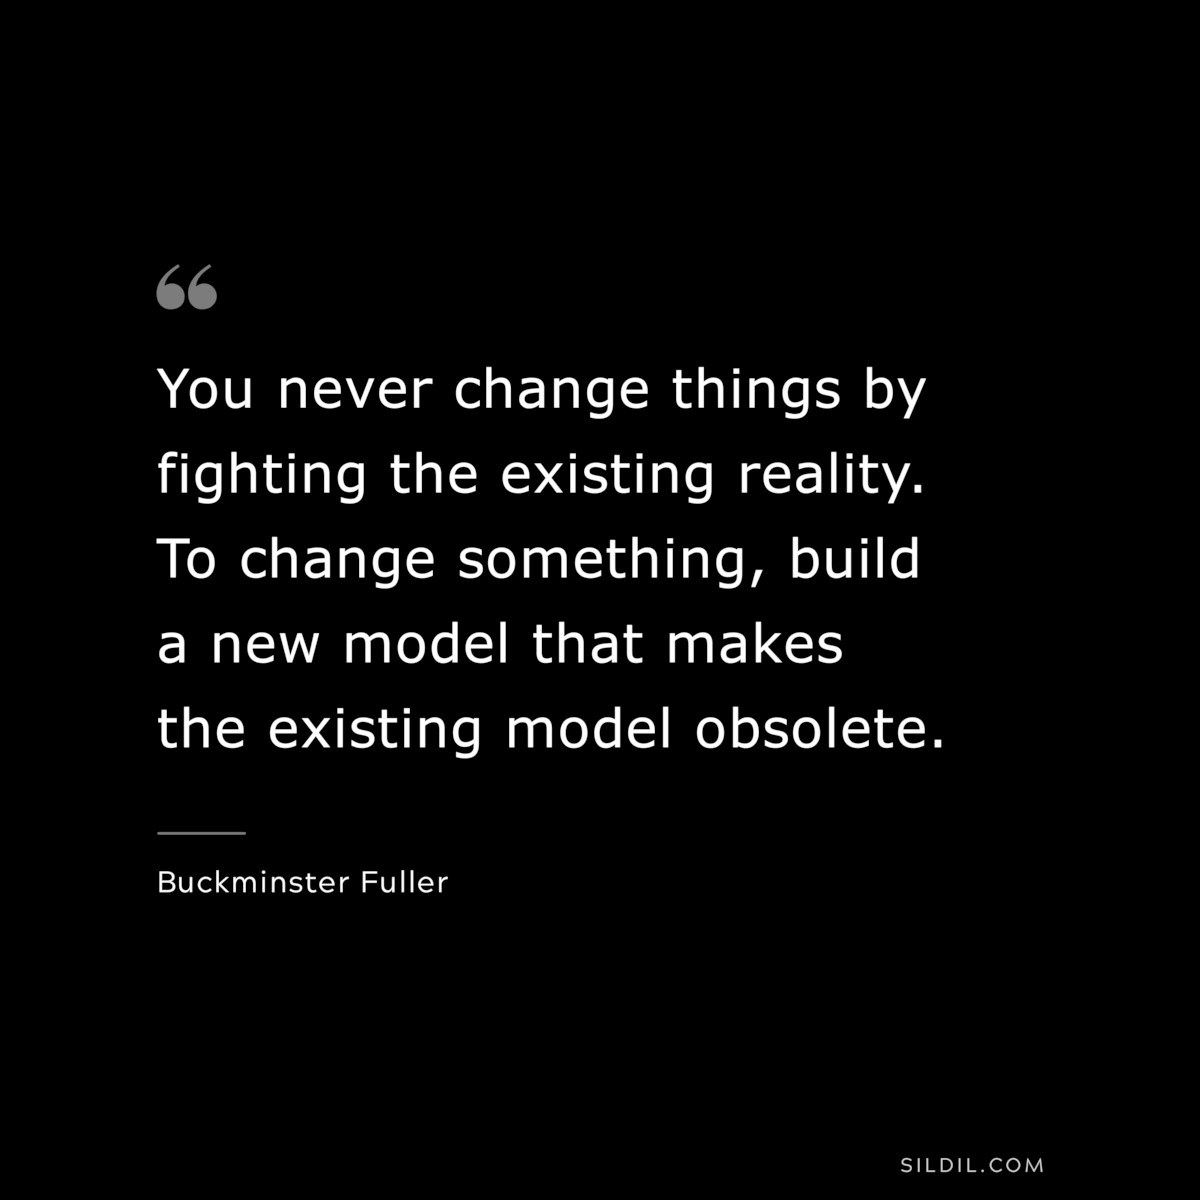 You never change things by fighting the existing reality. To change something, build a new model that makes the existing model obsolete. ― Buckminster Fuller